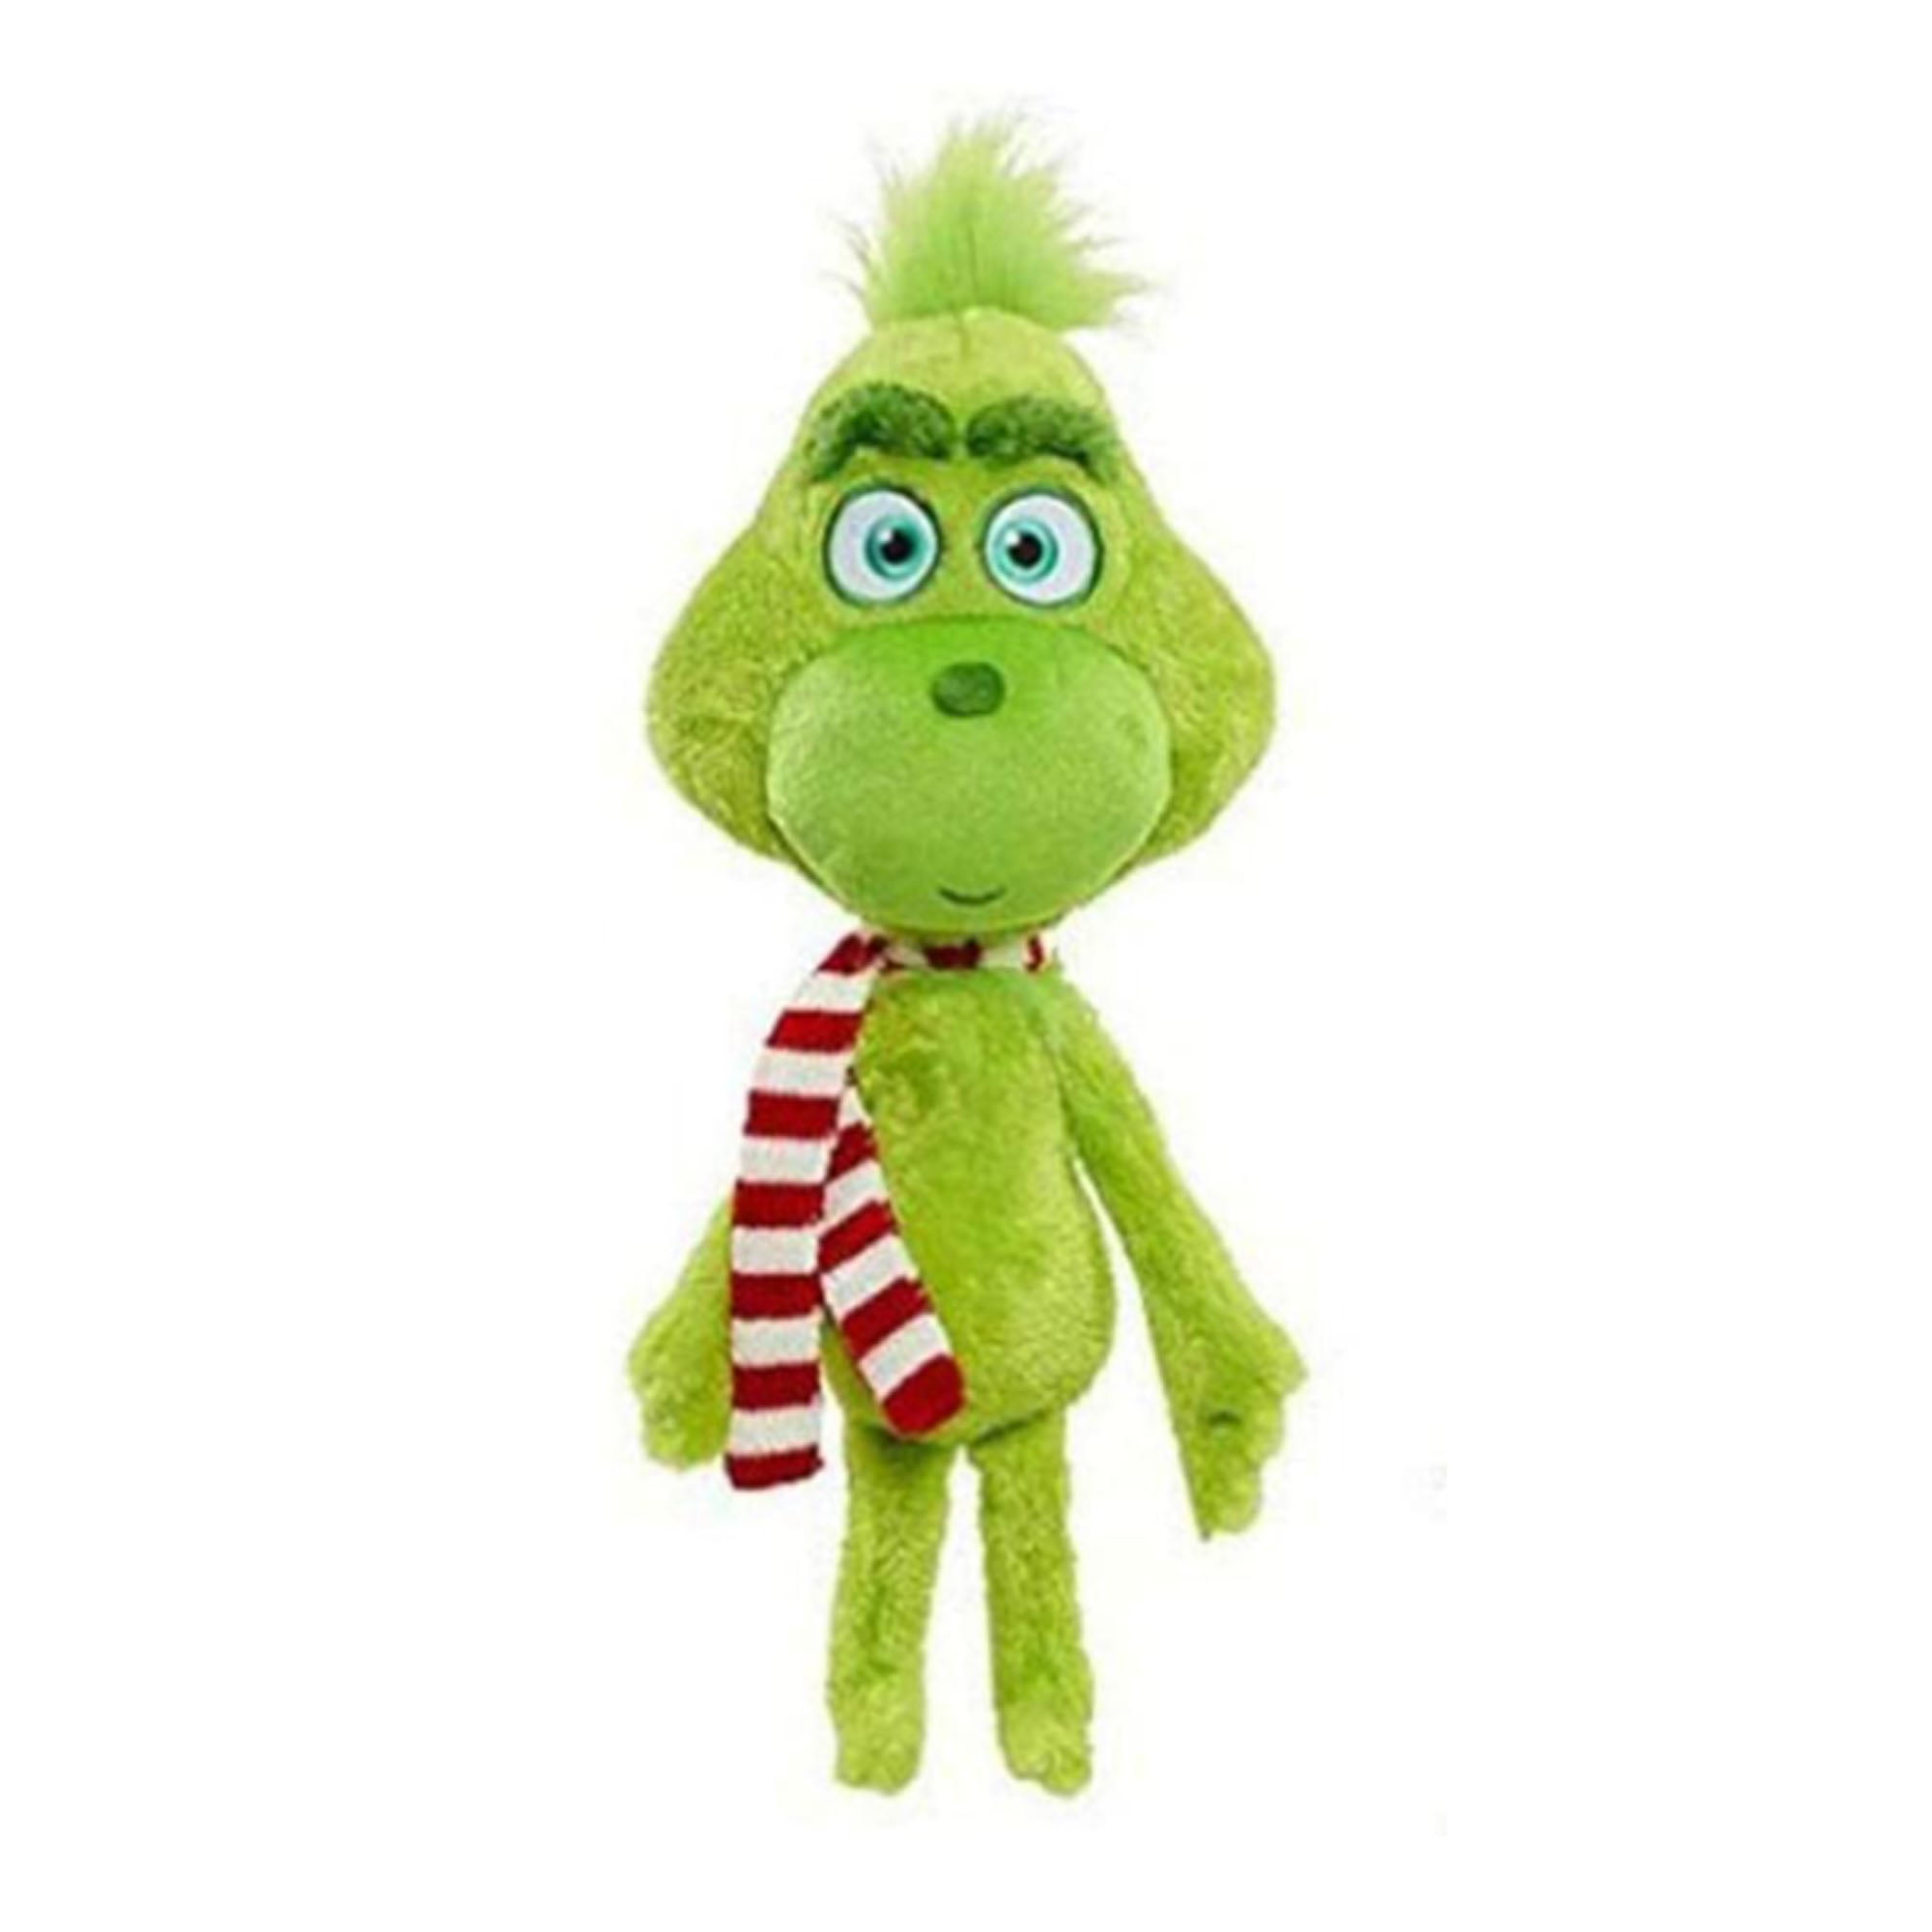 Details about   Dr Seuss How The Grinch Stole Christmas 20" Plush Stuffed Doll